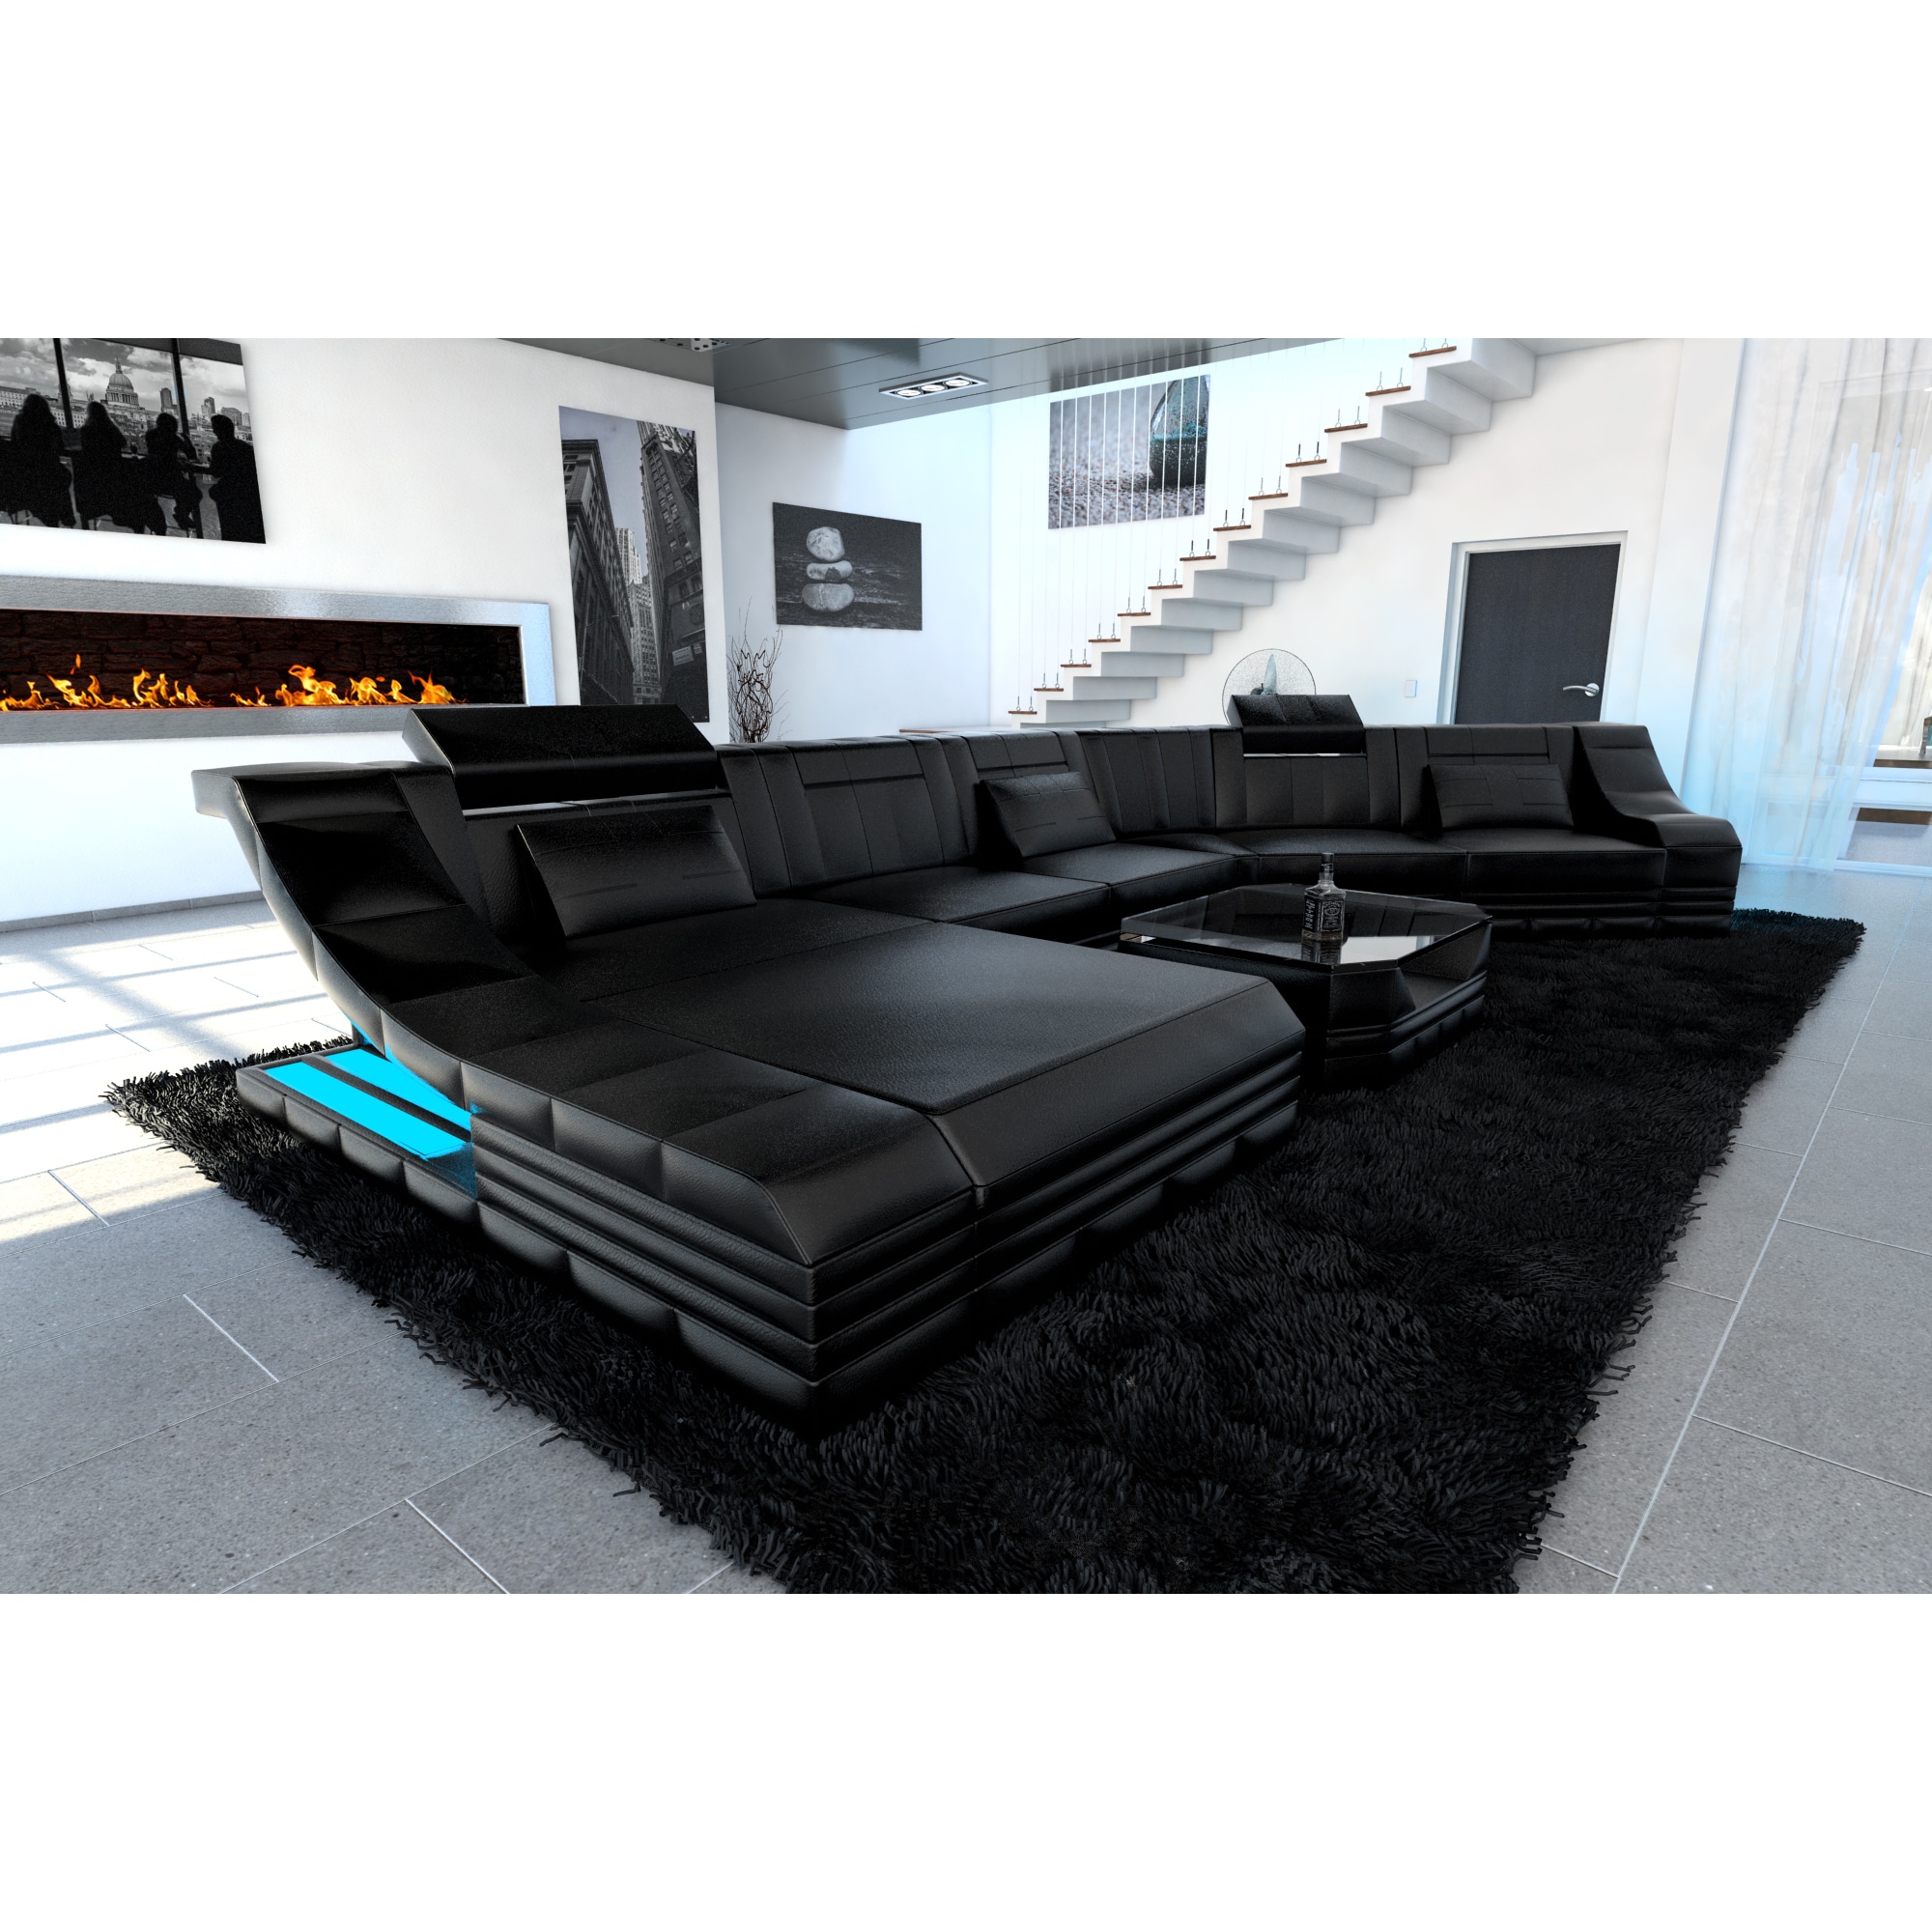 Shop Luxury Sectional Sofa New York Cl Led Lights Overstock